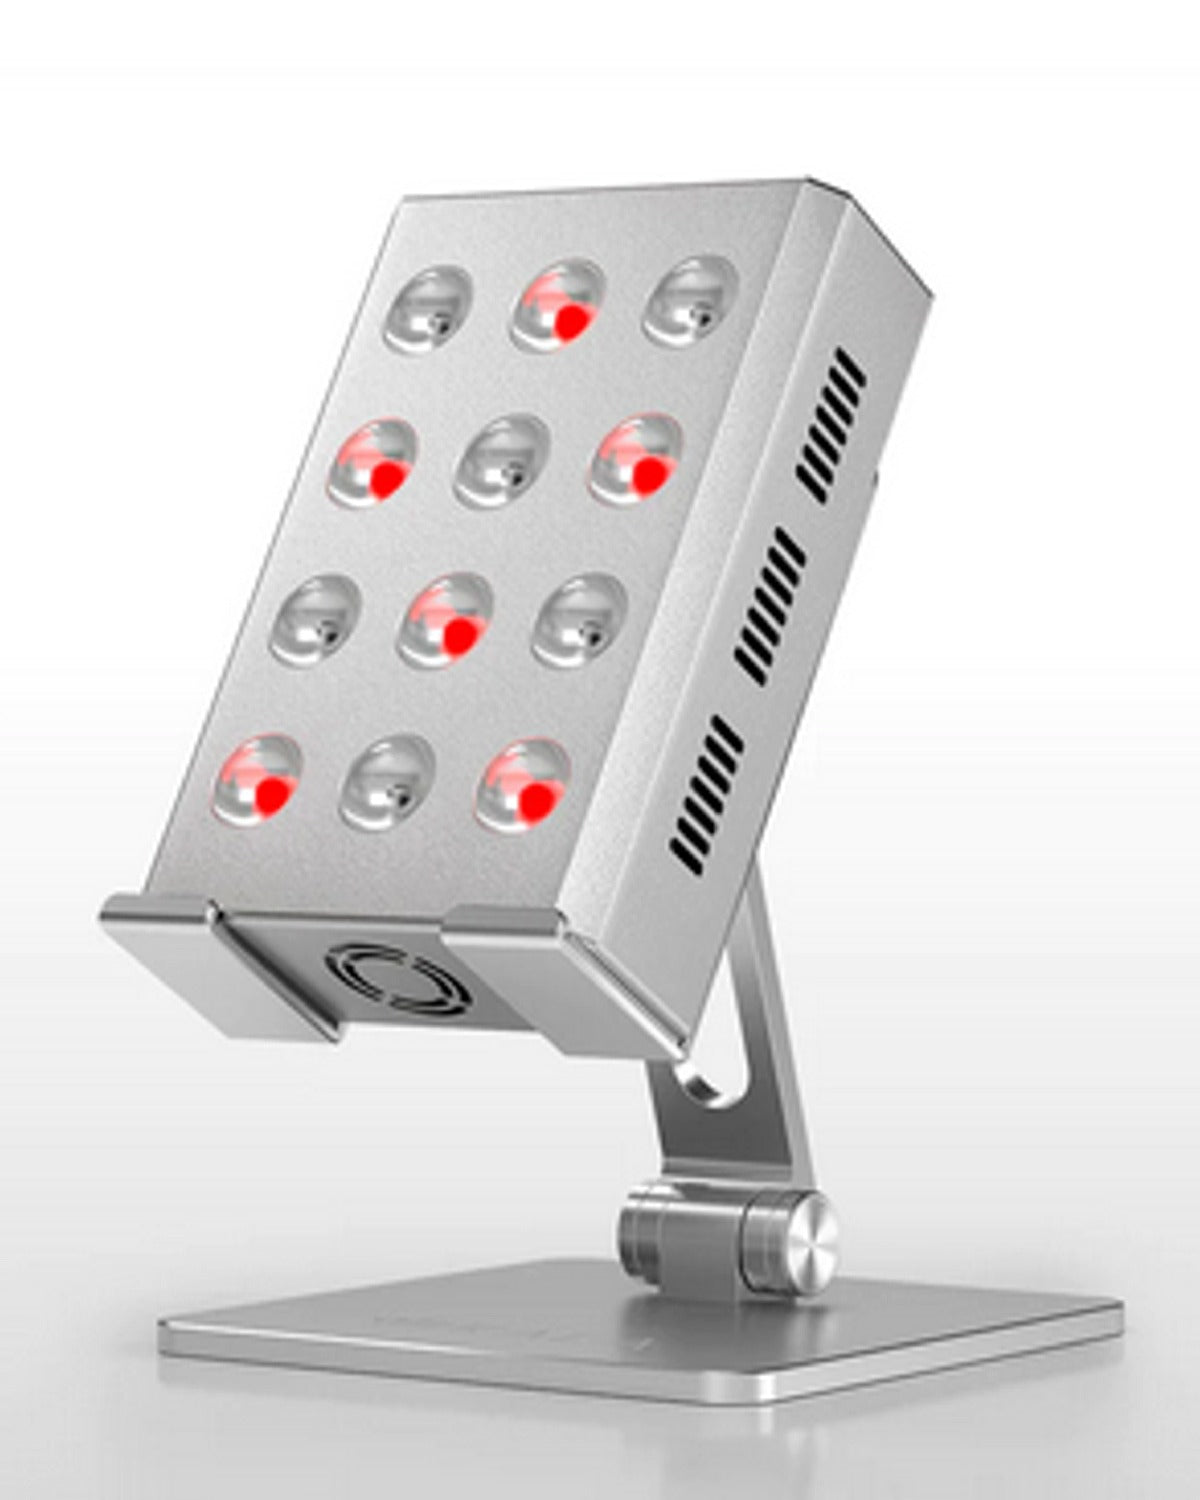 Red Light Therapy, Infrared Light, Calgary